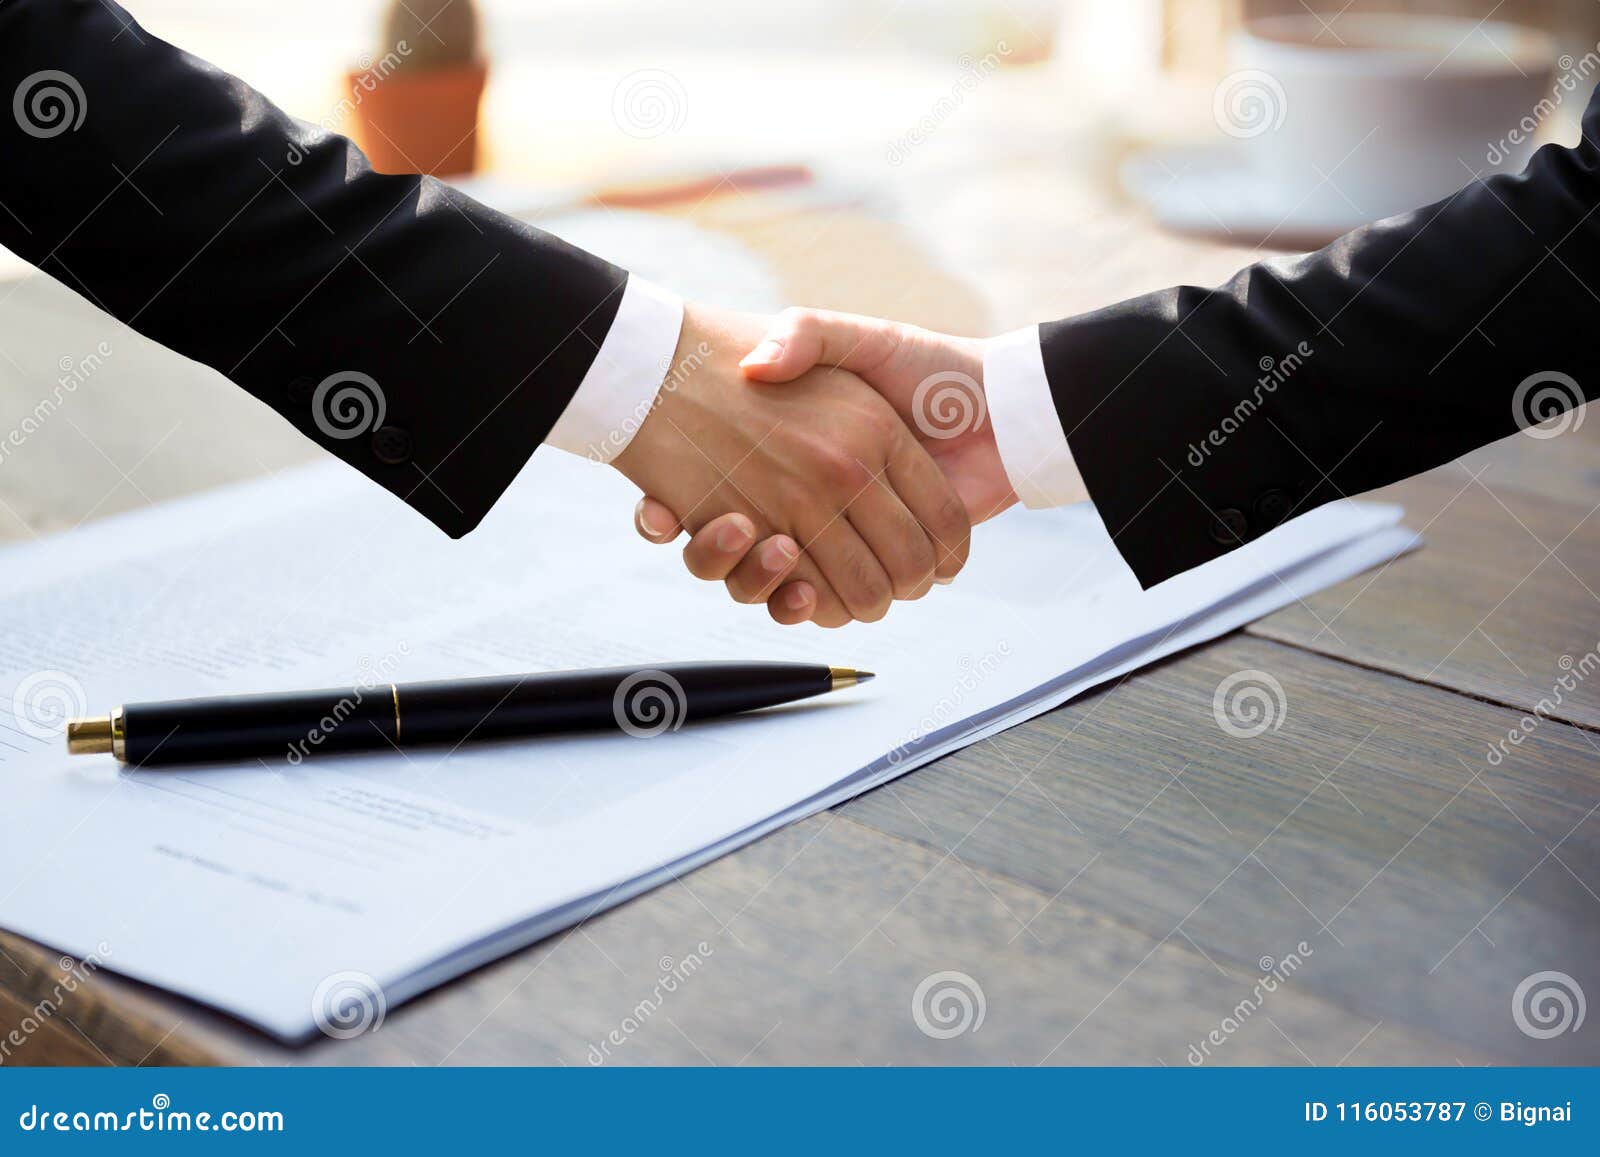 business successful hand shaking hands over agreement form